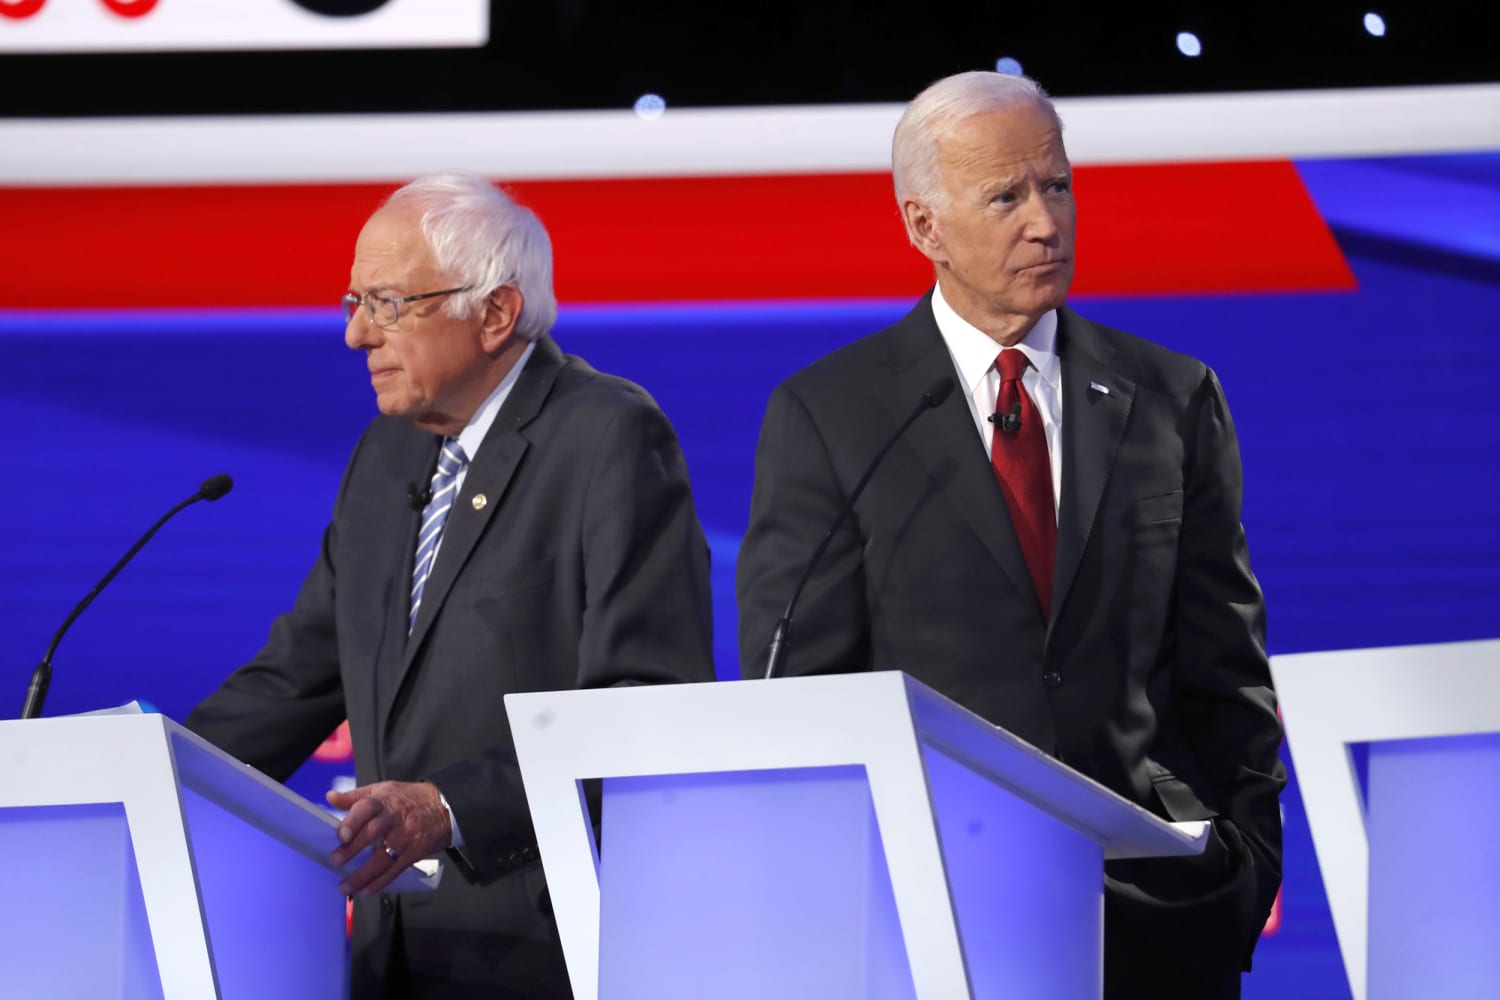 Sanders, Biden are neck-and-neck in new NBC/WSJ national